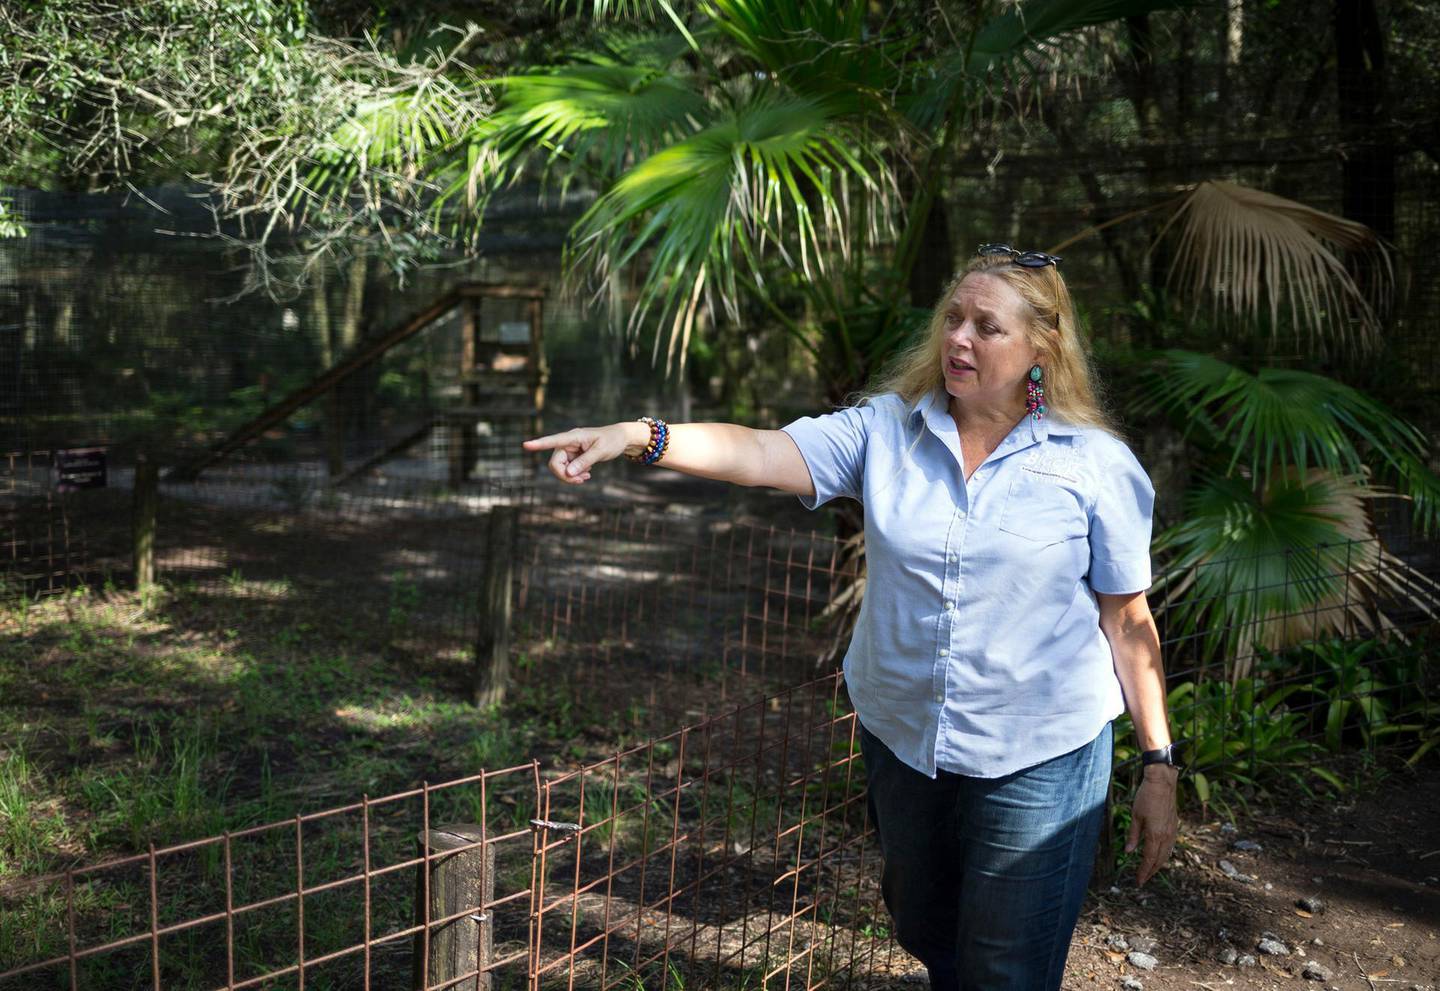 FILE - In this July 20, 2017 file photo, Carole Baskin, founder of Big Cat Rescue, walks the property near Tampa, Fla. Baskin was married to Jack â€œDonâ€ Lewis, whose 1997 disappearance remains unsolved and is the subject of a new Netflix series â€œTiger King.â€ (Loren Elliott/Tampa Bay Times via AP, File)